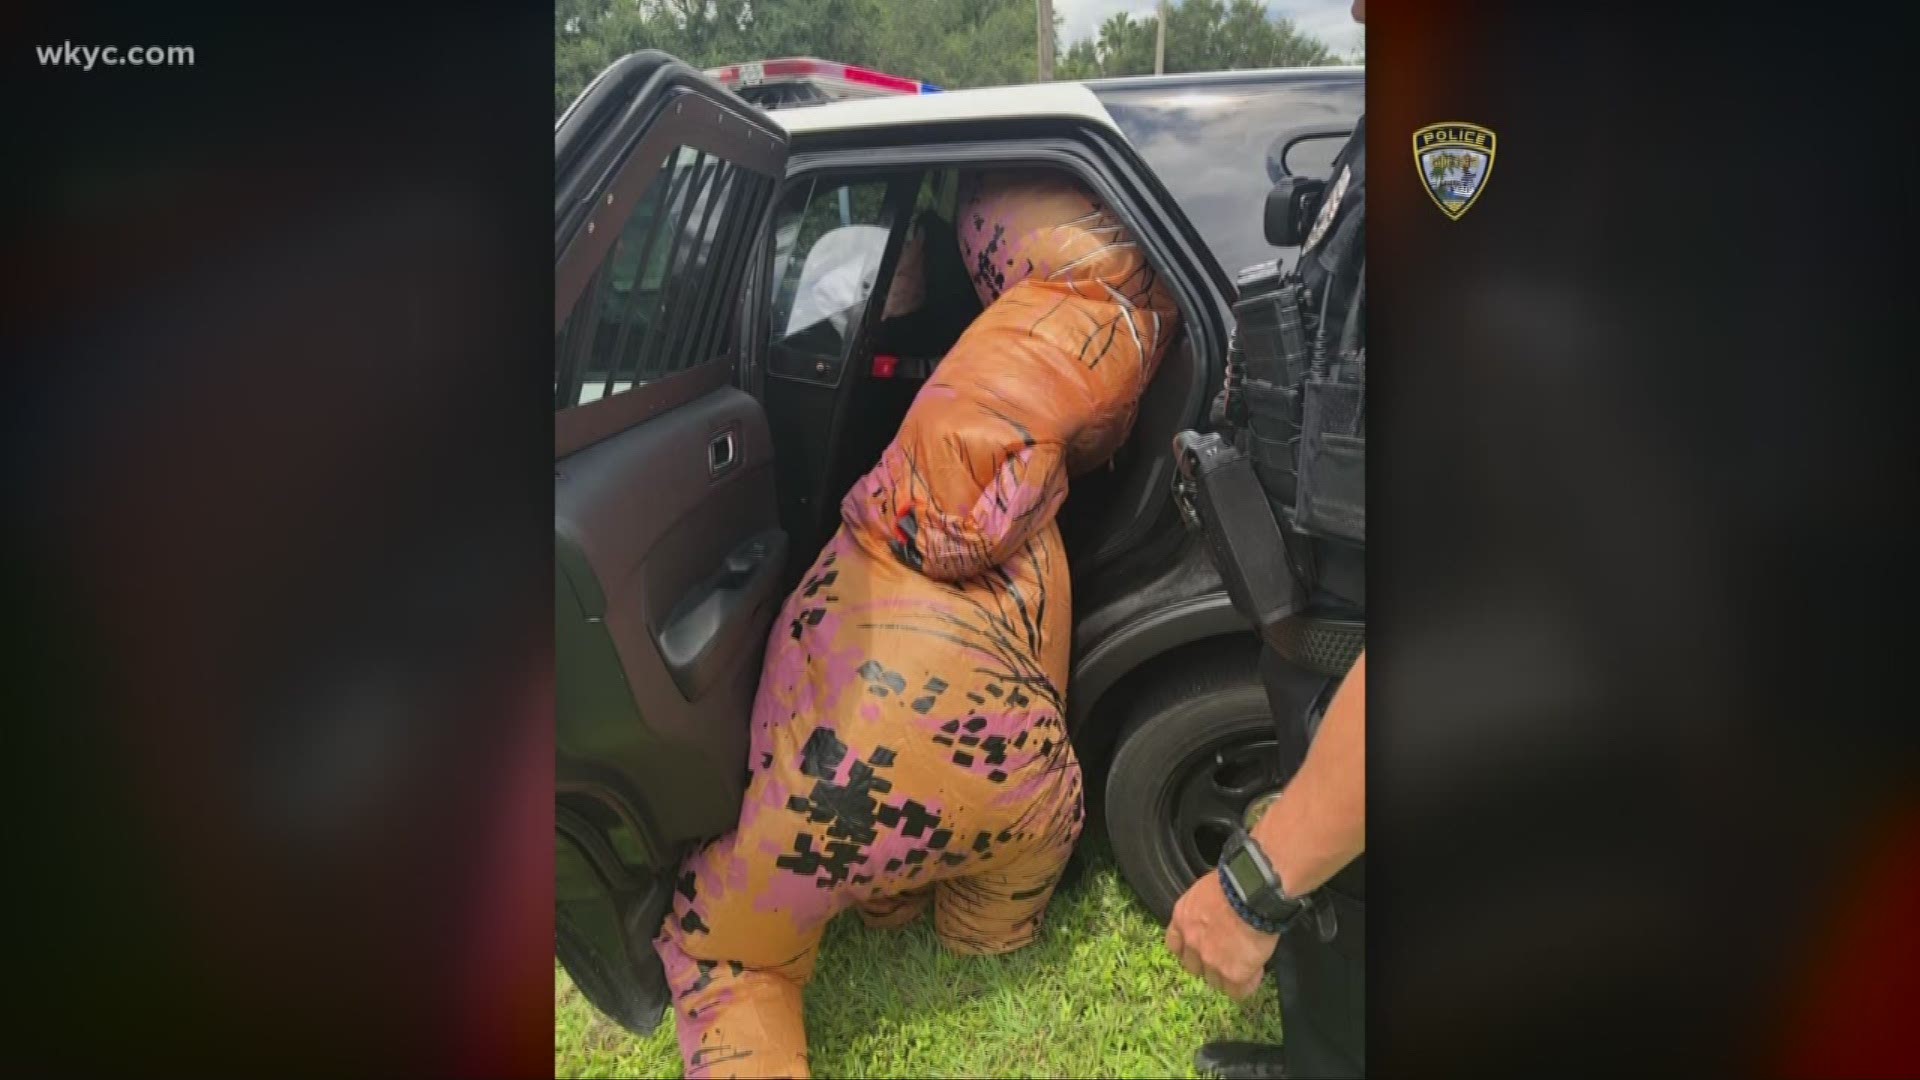 In an apparently humorous post about the incident,  the officer says he had a difficult time cuffing the dinosaur, because of his tiny arms, before cramming him into the back of a police car.